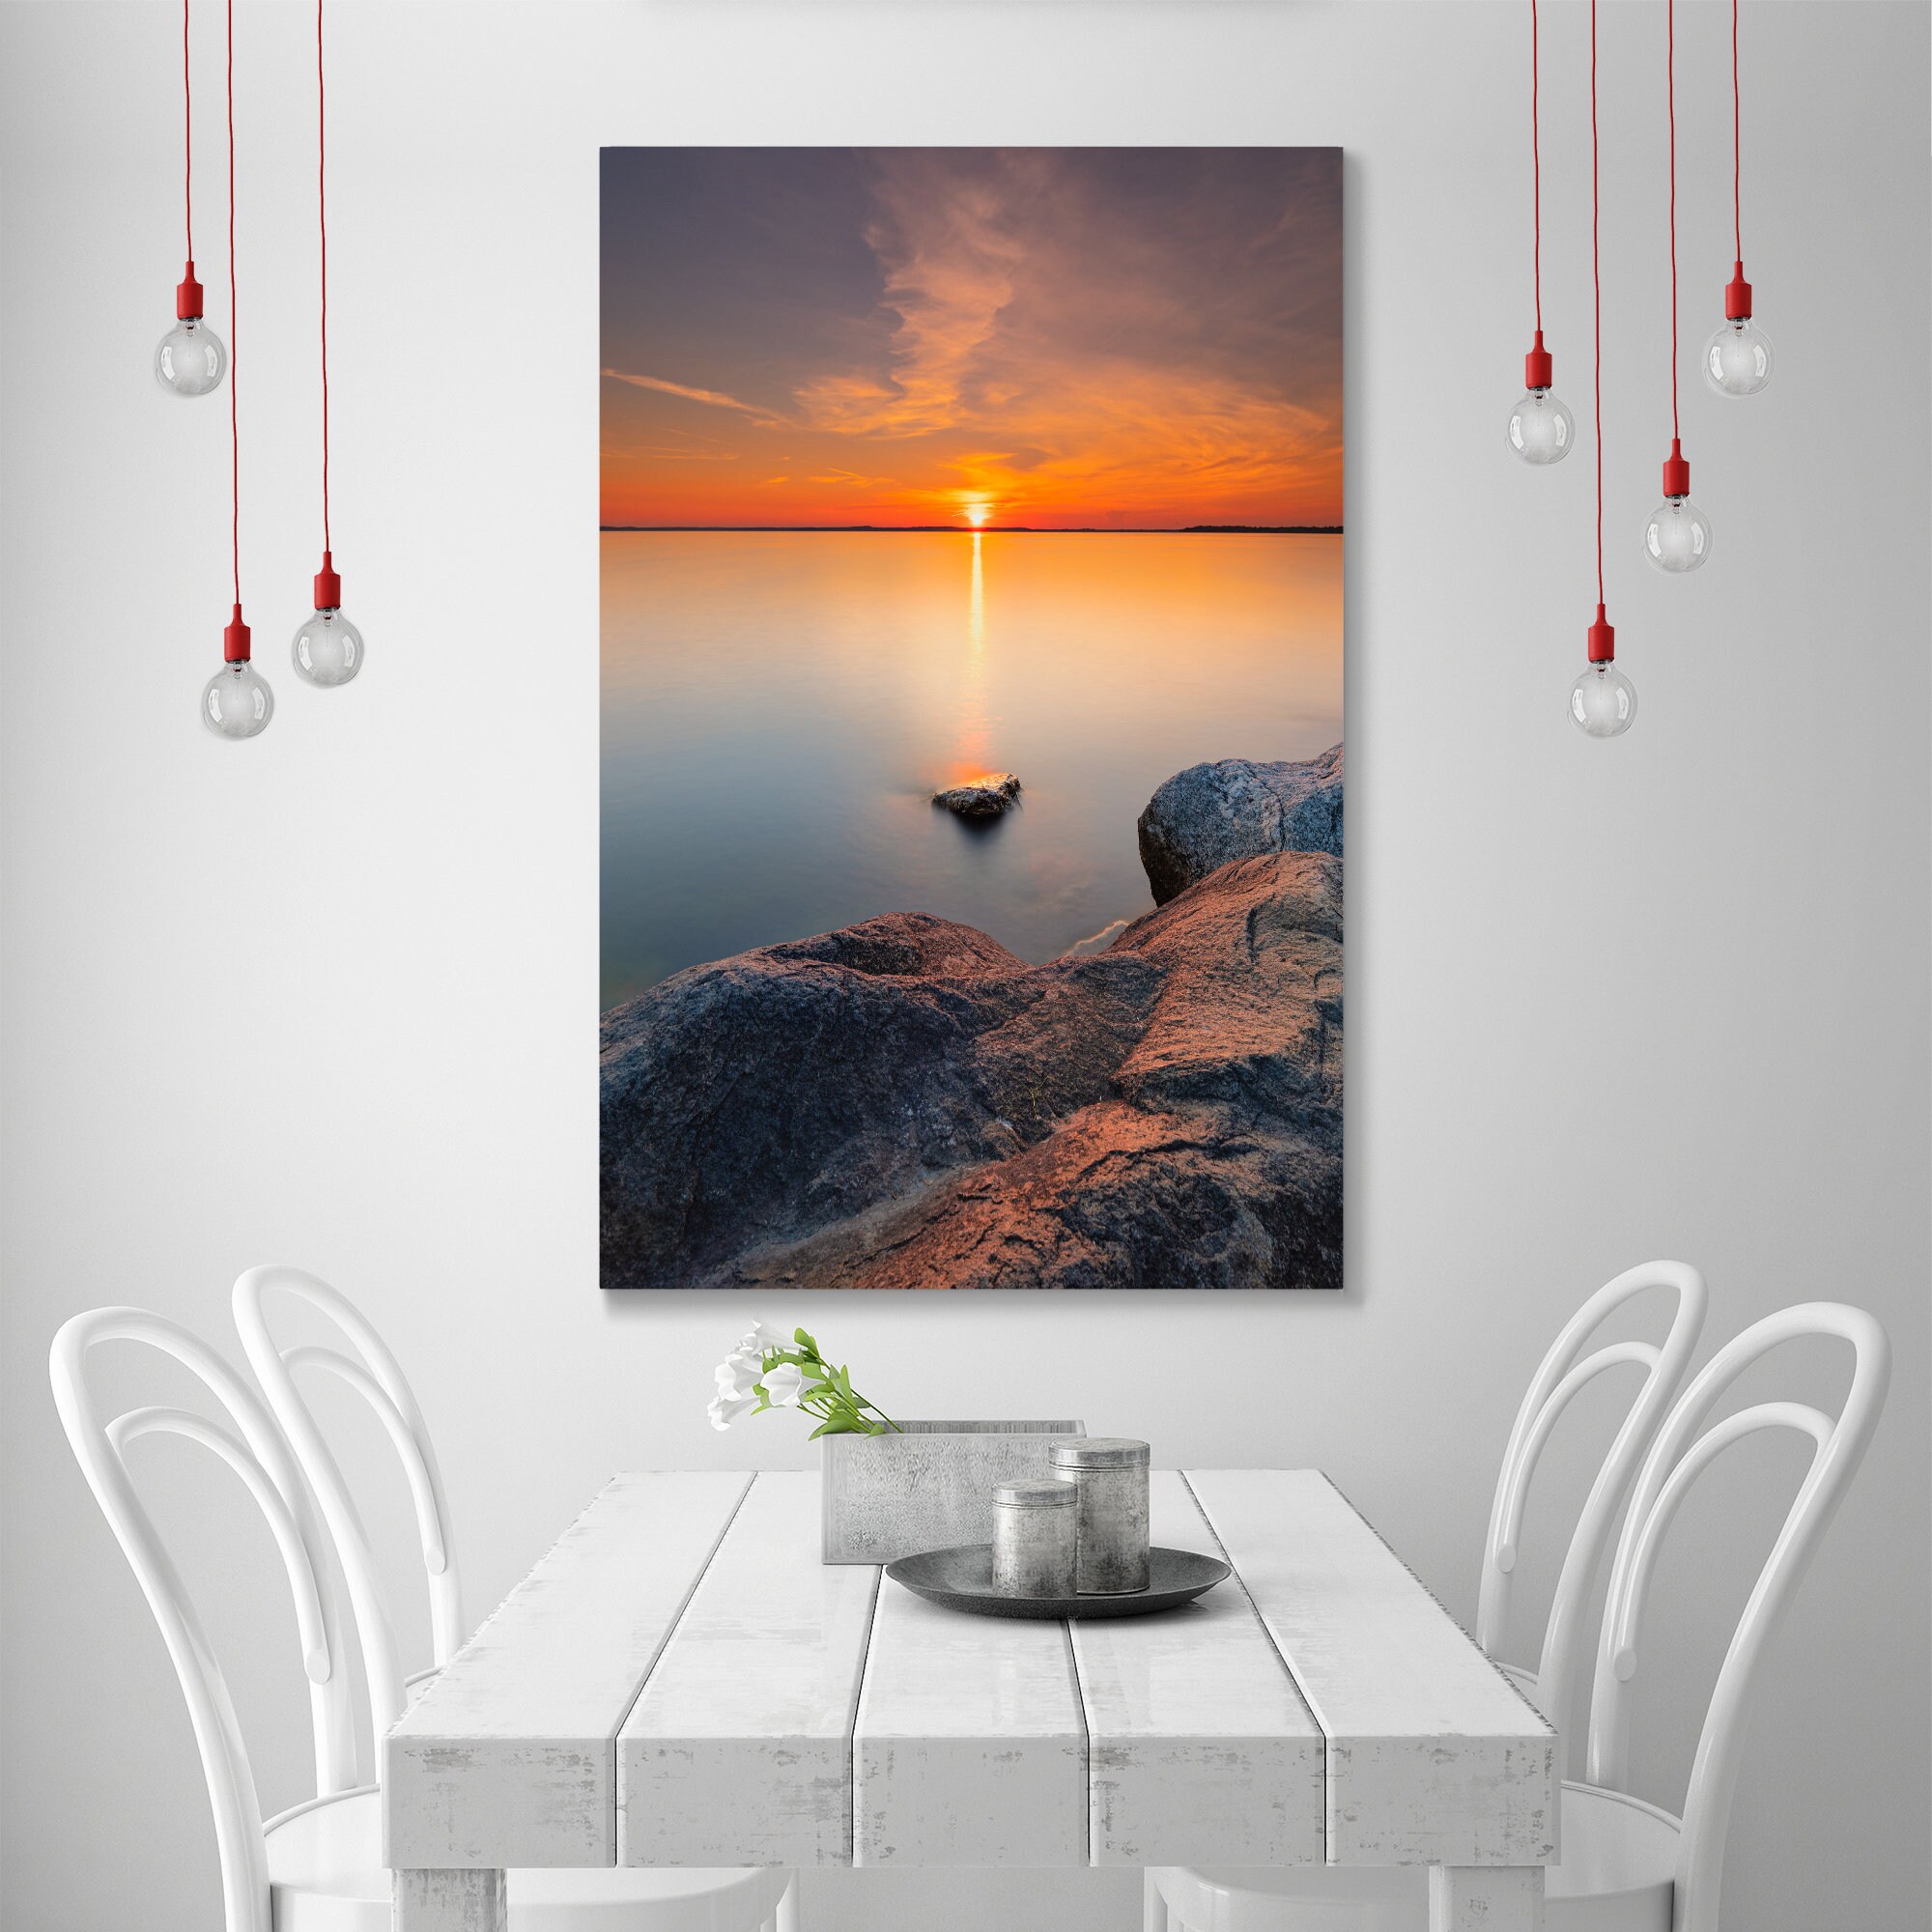 Beautiful sunset wall decor for home, Sunset over water wall art pictures, Landscape with Lake original decor for wallthumbnail